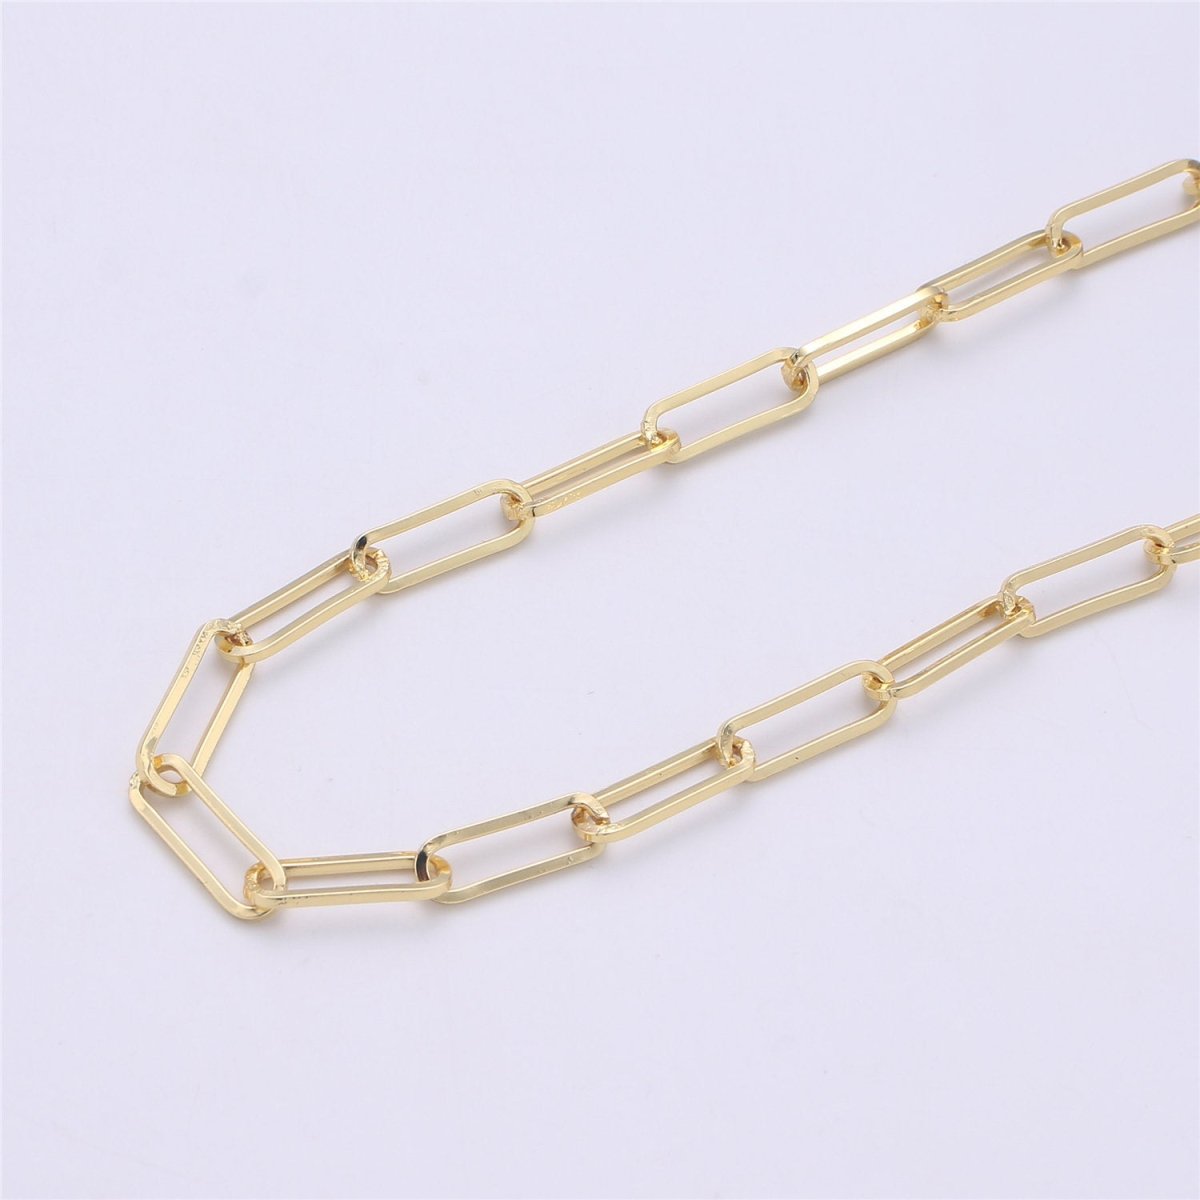 15X5mm 24K Gold Filled Chain, Black, Silver, Rose Gold Paperclip Elongated Chain 1mm Thick For Necklace Bracelet Anklet Component Supply | ROLL-057, ROLL-058, ROLL-059, ROLL-060 Clearance Pricing - DLUXCA